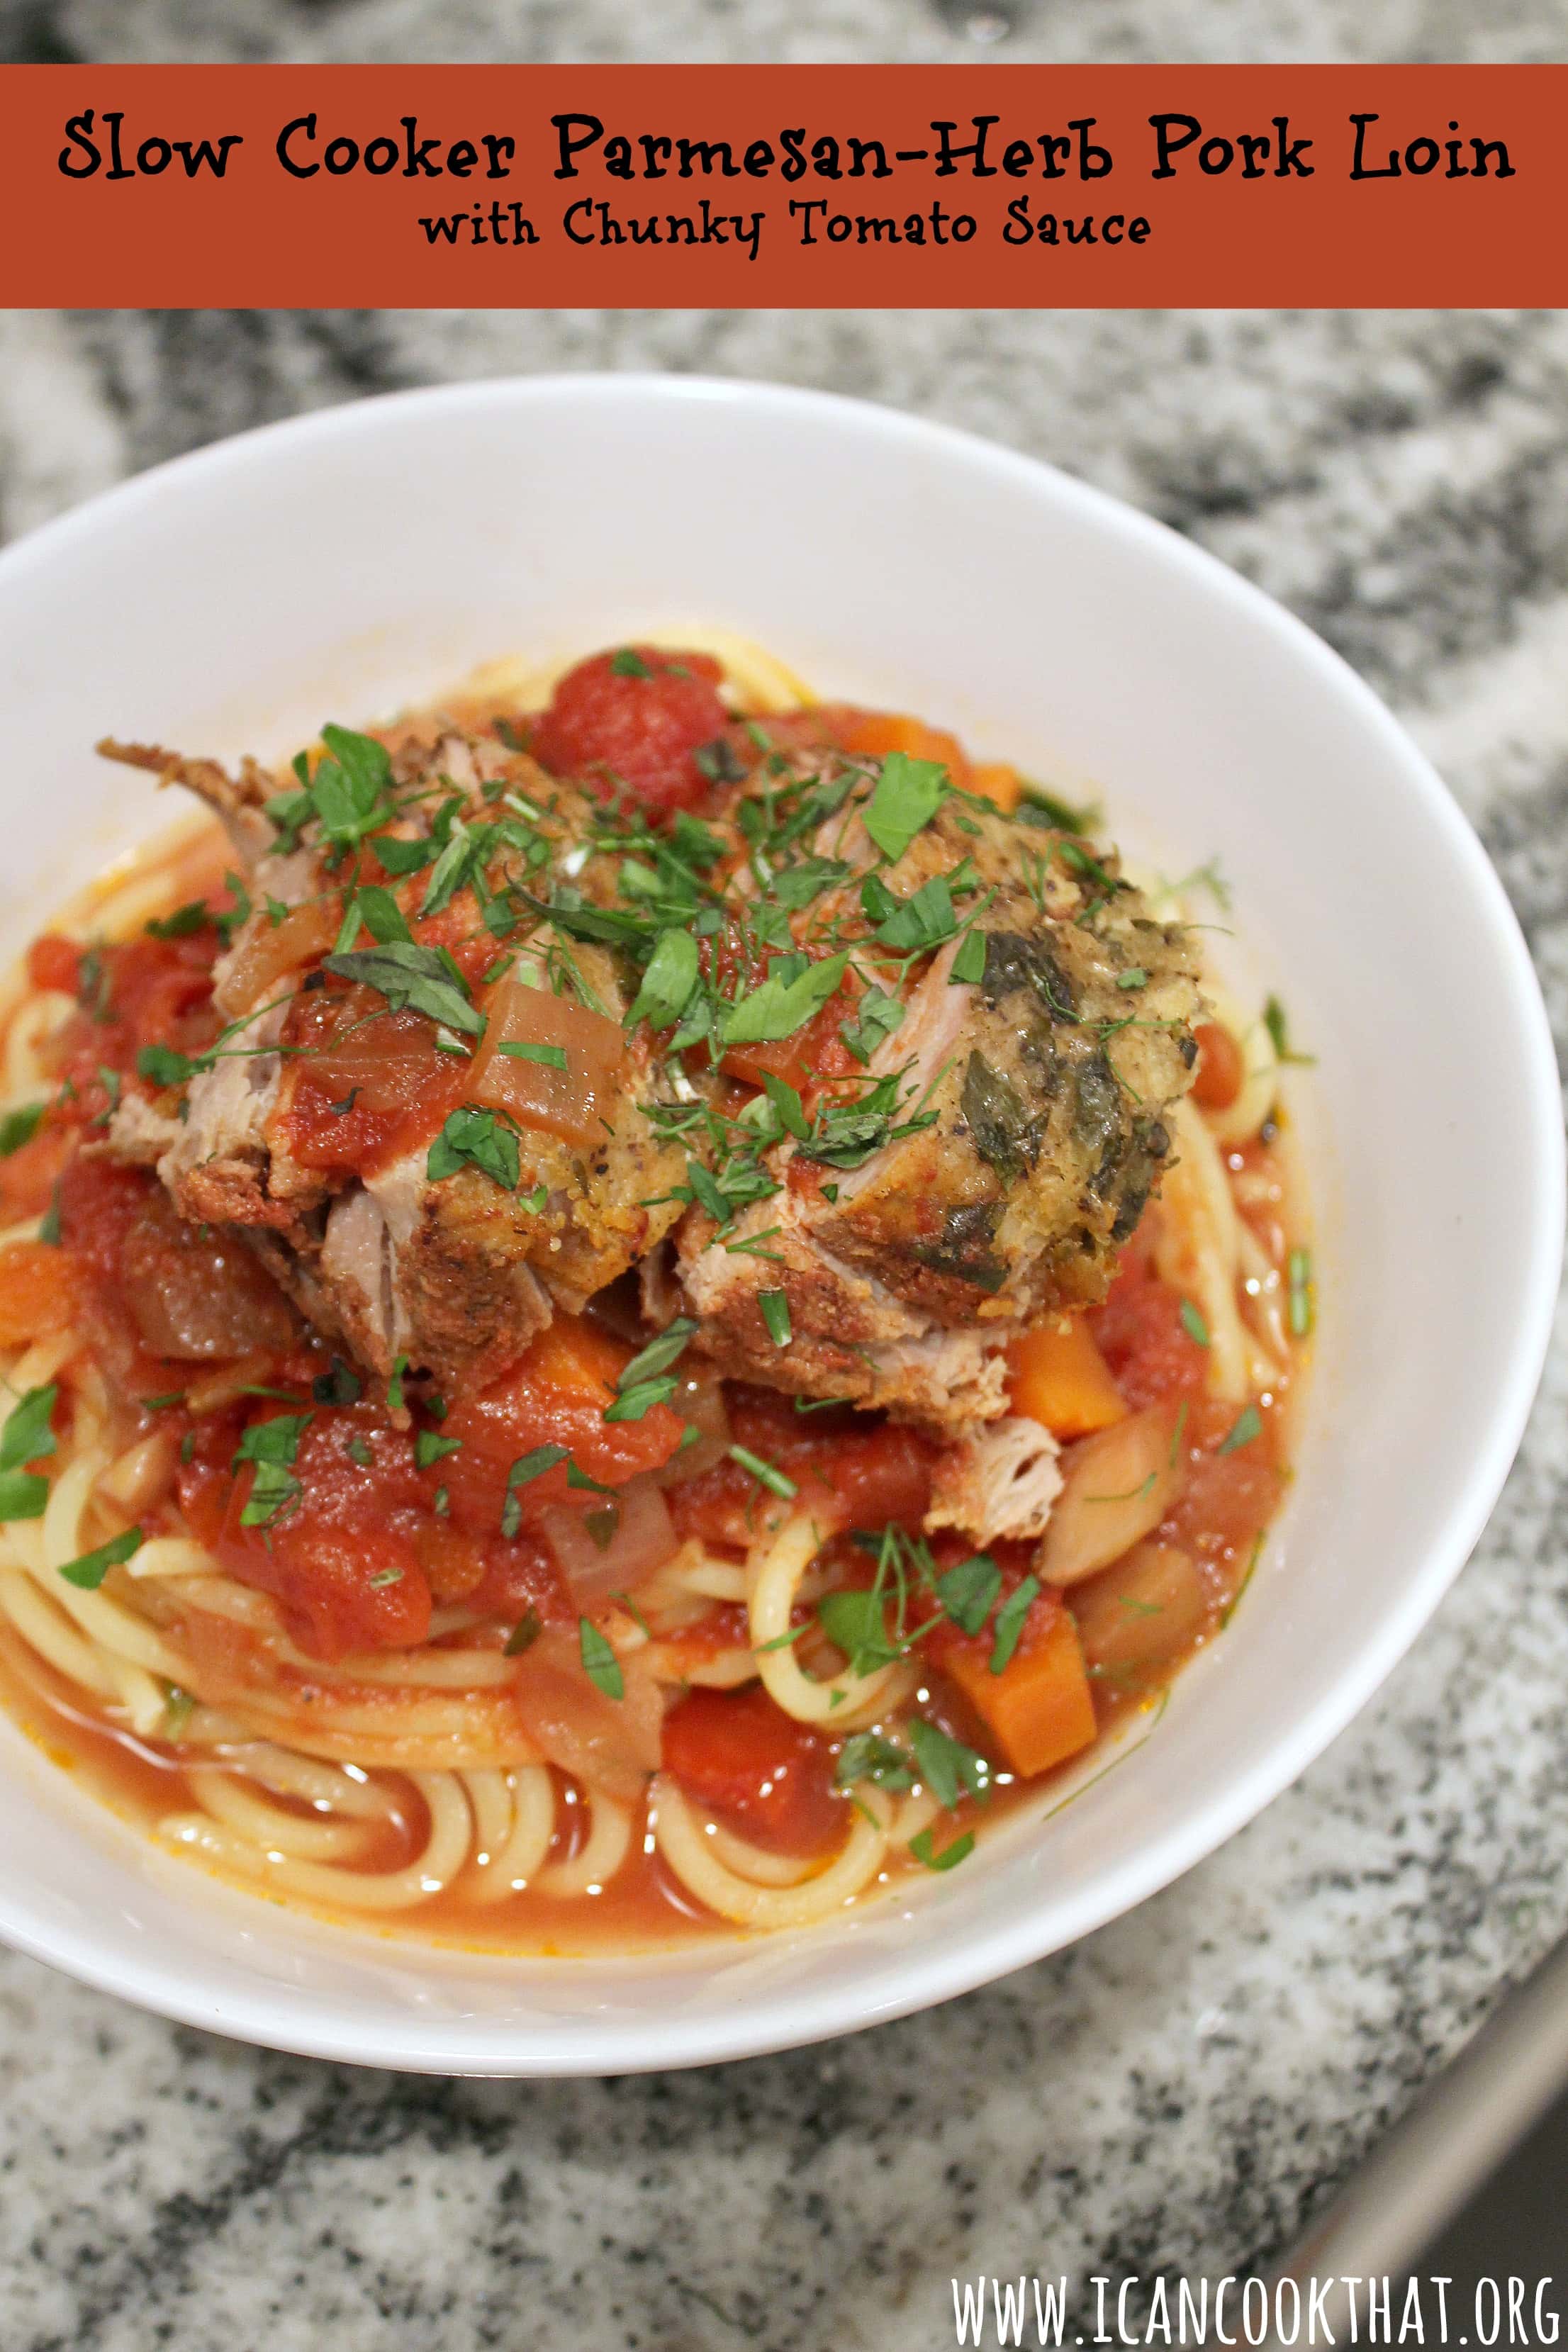 Slow Cooker Parmesan-Herb Pork Loin with Chunky Tomato Sauce